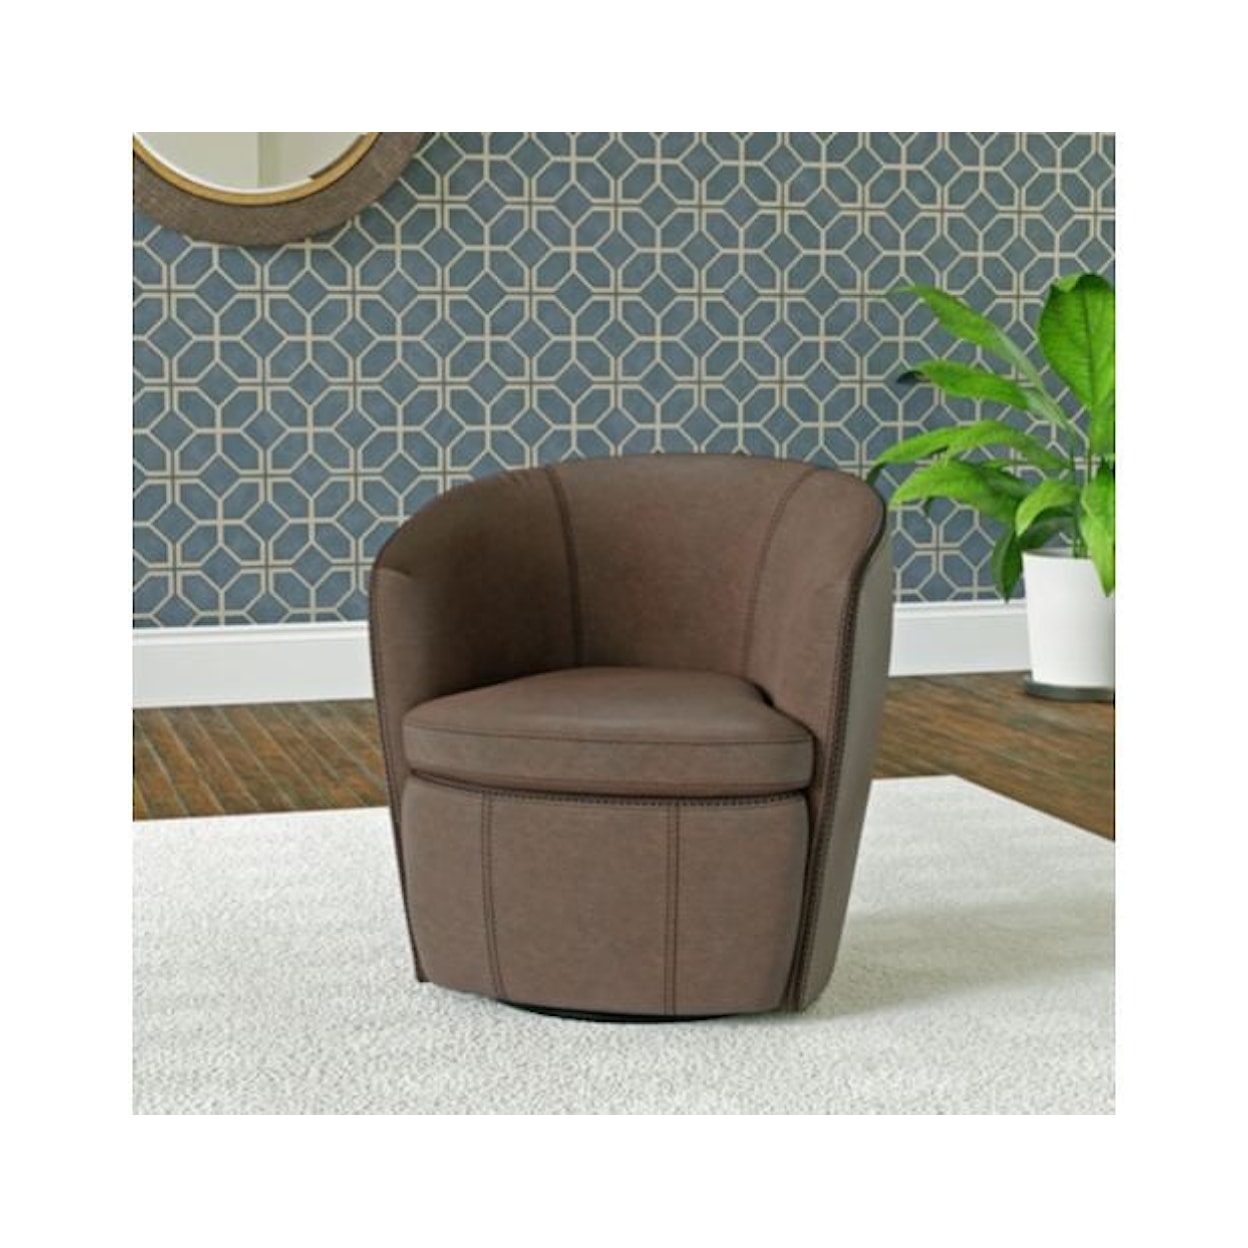 Parker House Barolo Upholstered Chairs